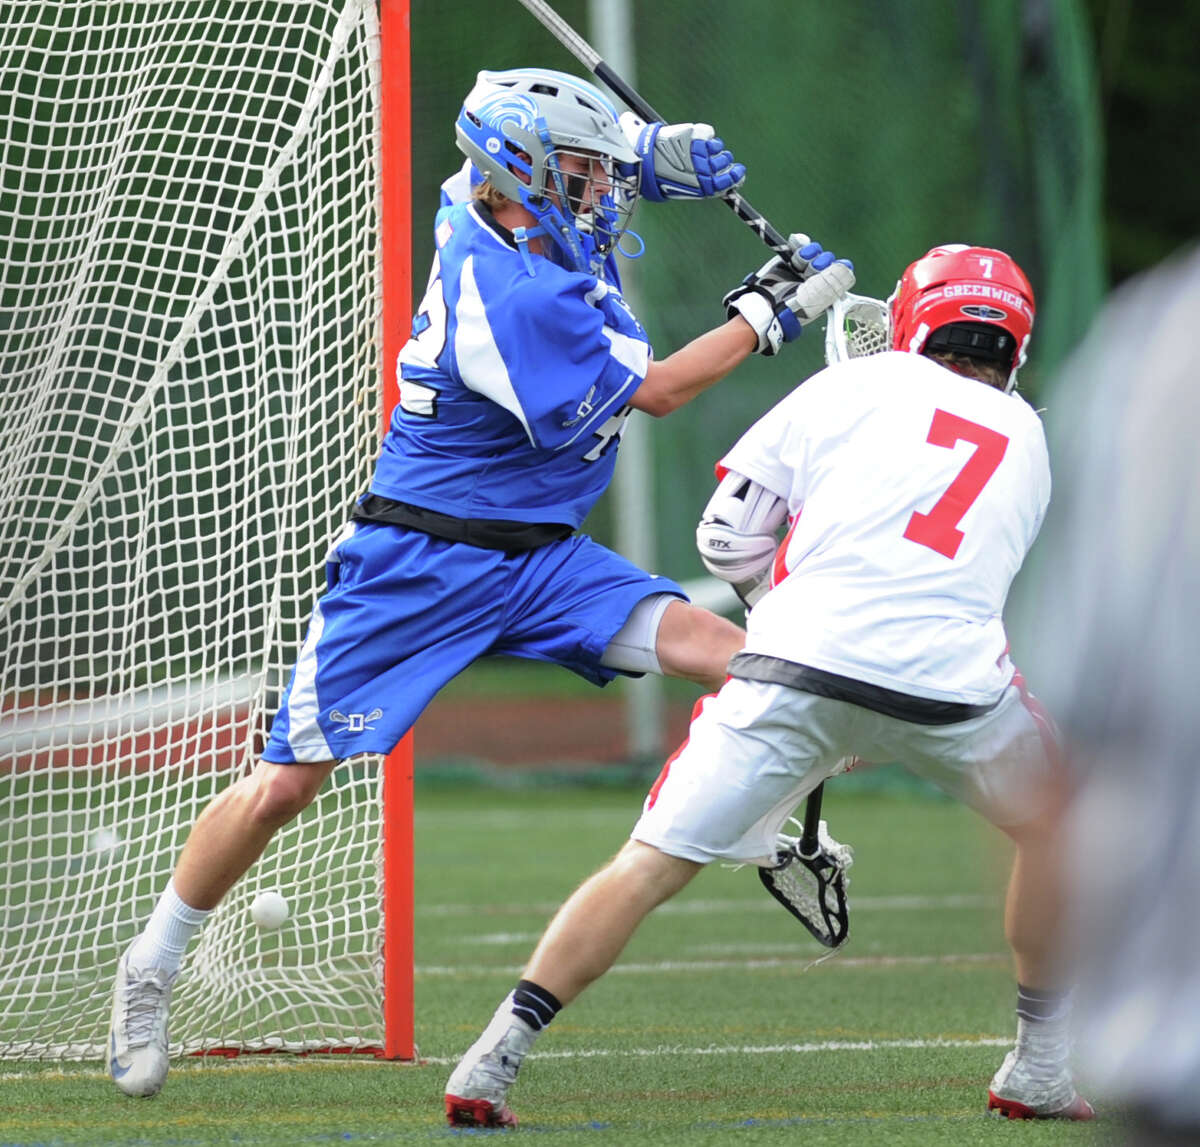 Darien goalie Phil Huffard, left, is unable to make the save on a goal by Jamie Paradise (# 7) of Greenwich during the boys high school lacrosse match between Greenwich High School and Darien High School at Greenwich, Friday, May 10, 2013. Greenwich defeated Darien, 8-6.